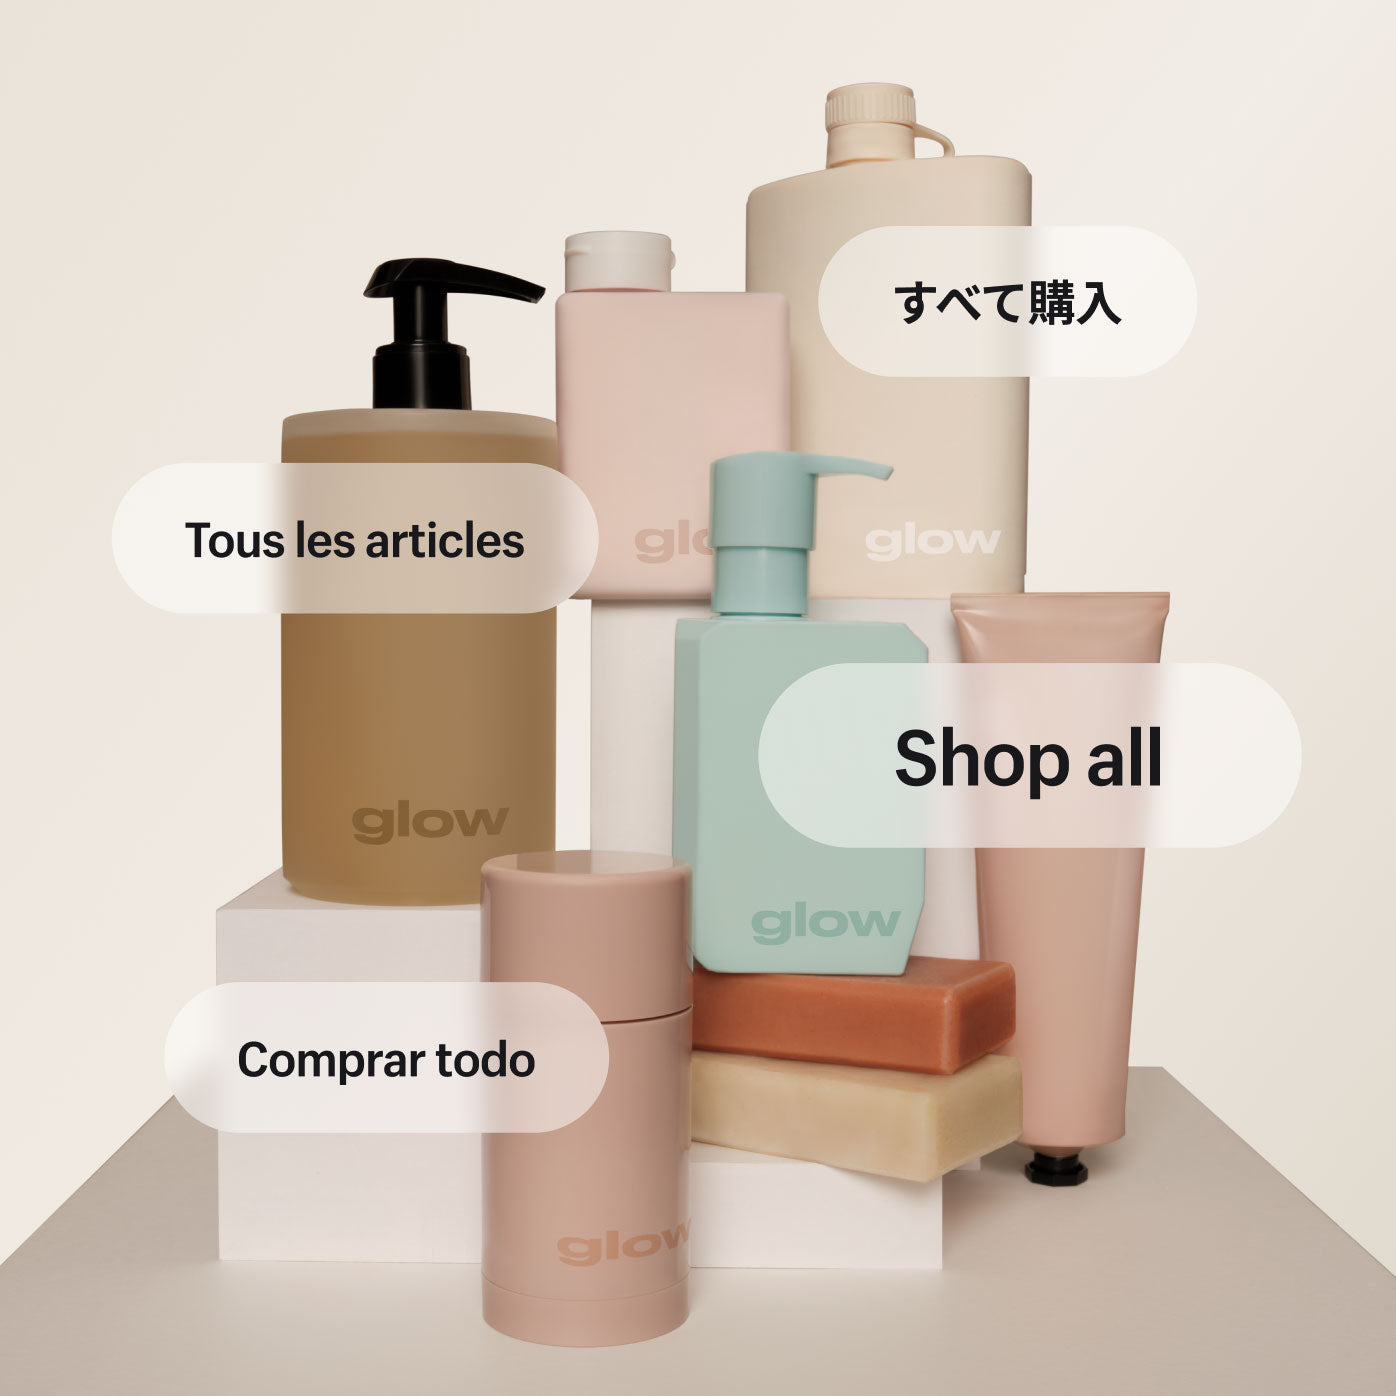 A collection of skincare products in stylish neutral-toned minimal packaging assembled on a platform. Products range from bottles and tubes to bars of soap and a cylindrical stick of deodorant. Each product is branded with a Glow logo. Several text graphics show the words Shop all translated into Spanish, French, and Japanese.